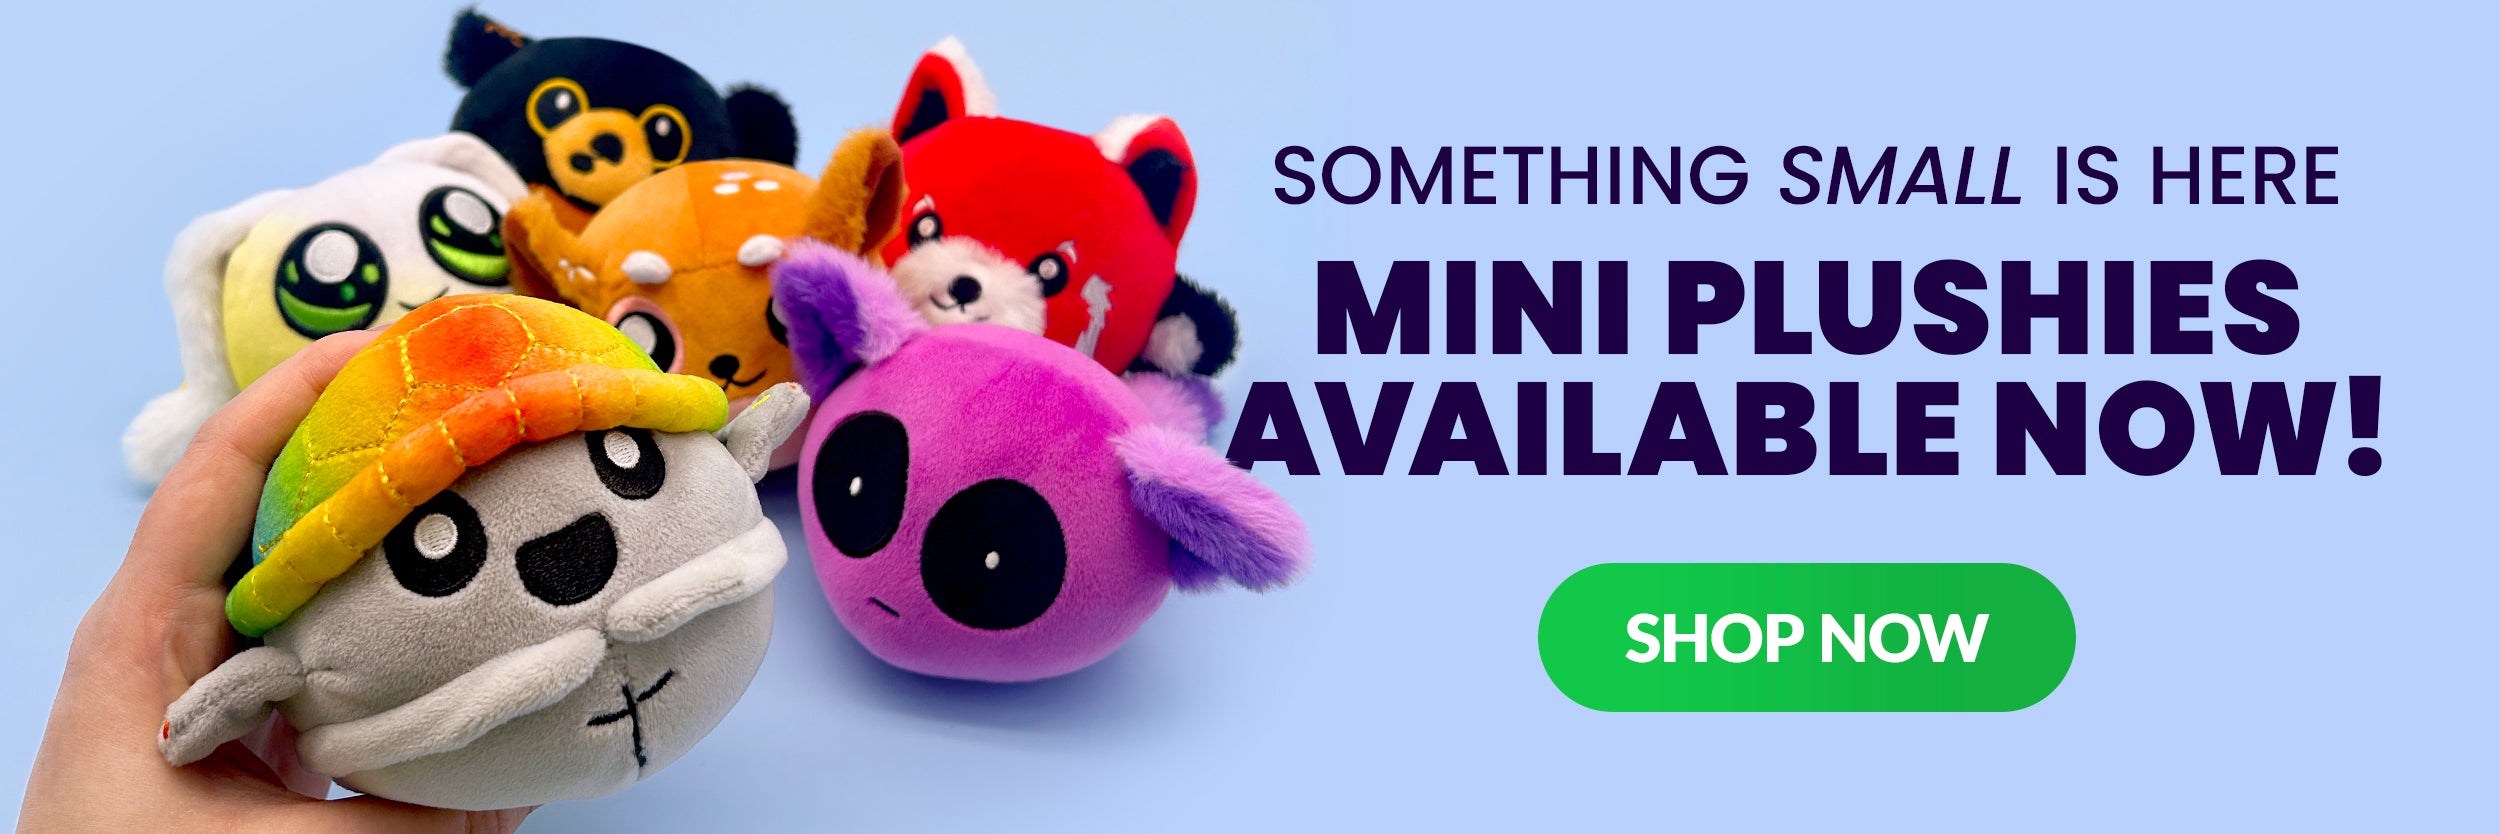 something small is here! shop now button, image of mini plushies, rainbow scutes - talia - nat - fawn - calysta - and lucky